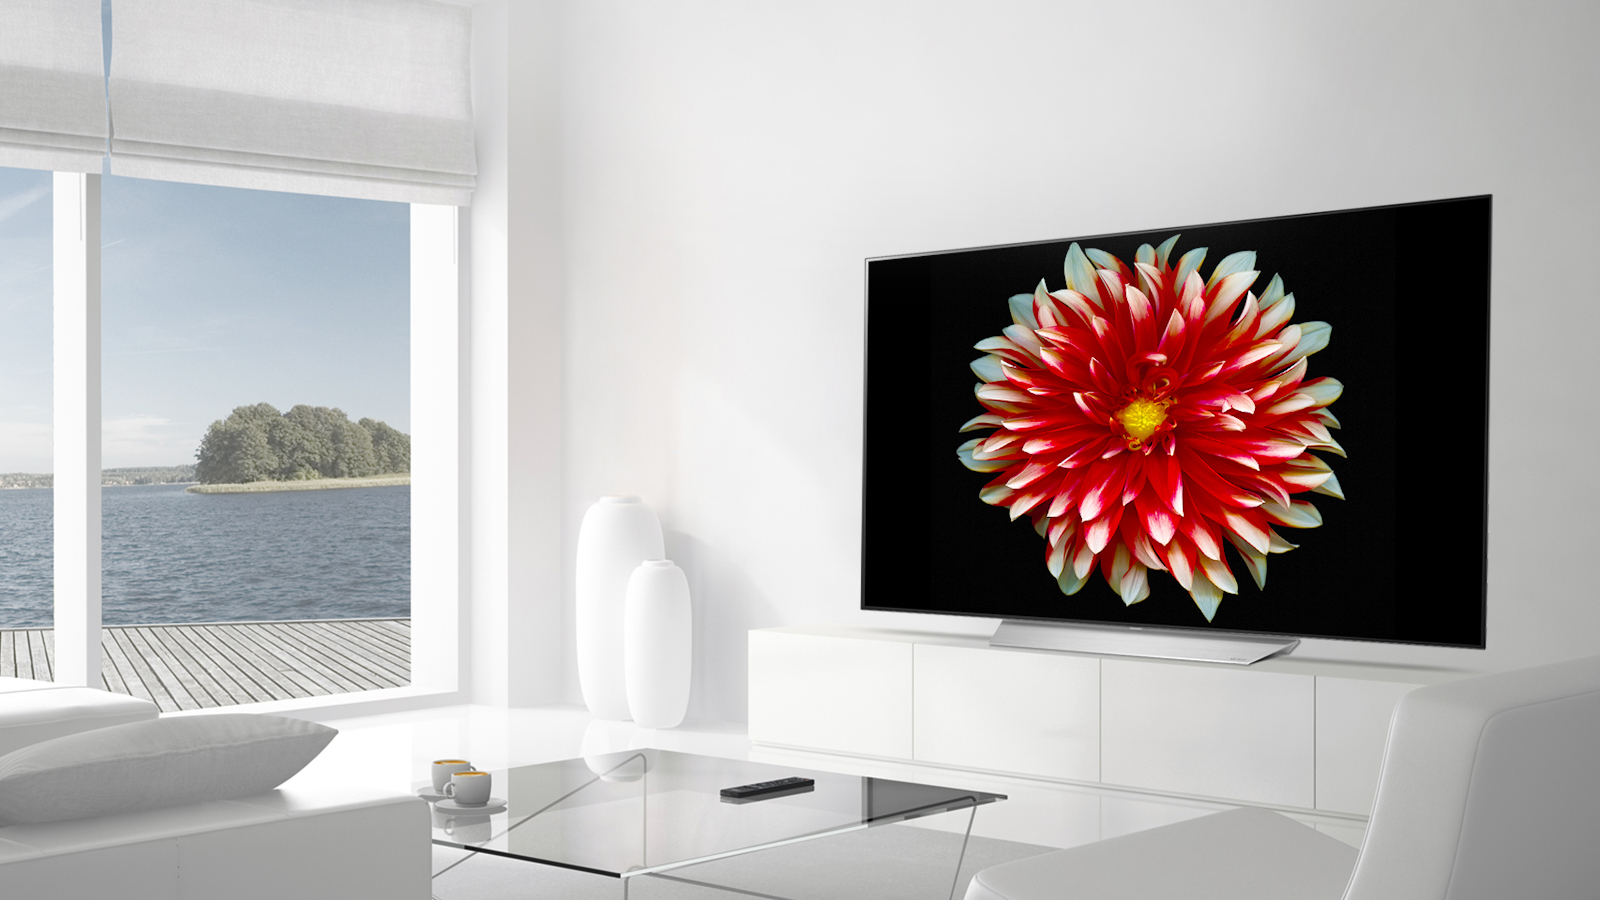 Some LG OLED TVs are being recalled – here's what you need to know ...